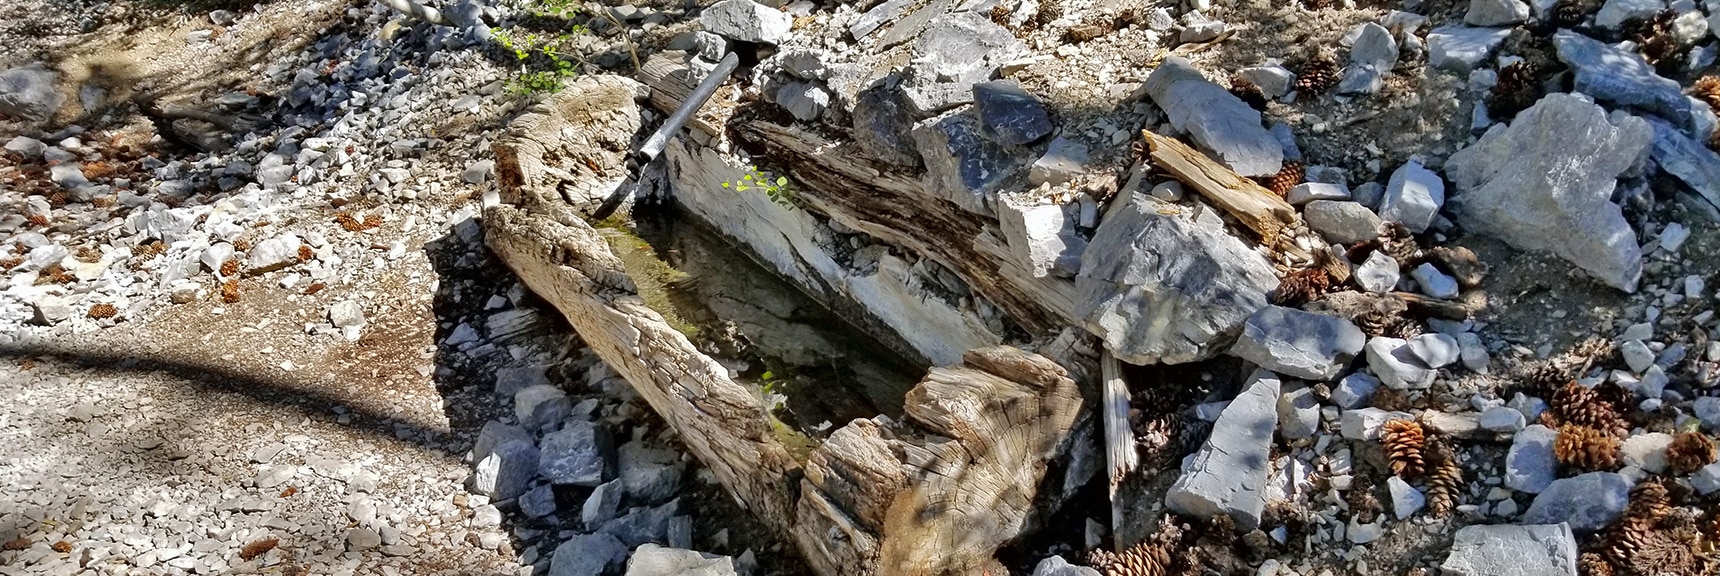 Water from Cave Springs Collects in a Hollowed Log on the North Loop Trail | Mummy Mountain NW Cliffs | Mt Charleston Wilderness | Spring Mountains, Nevada